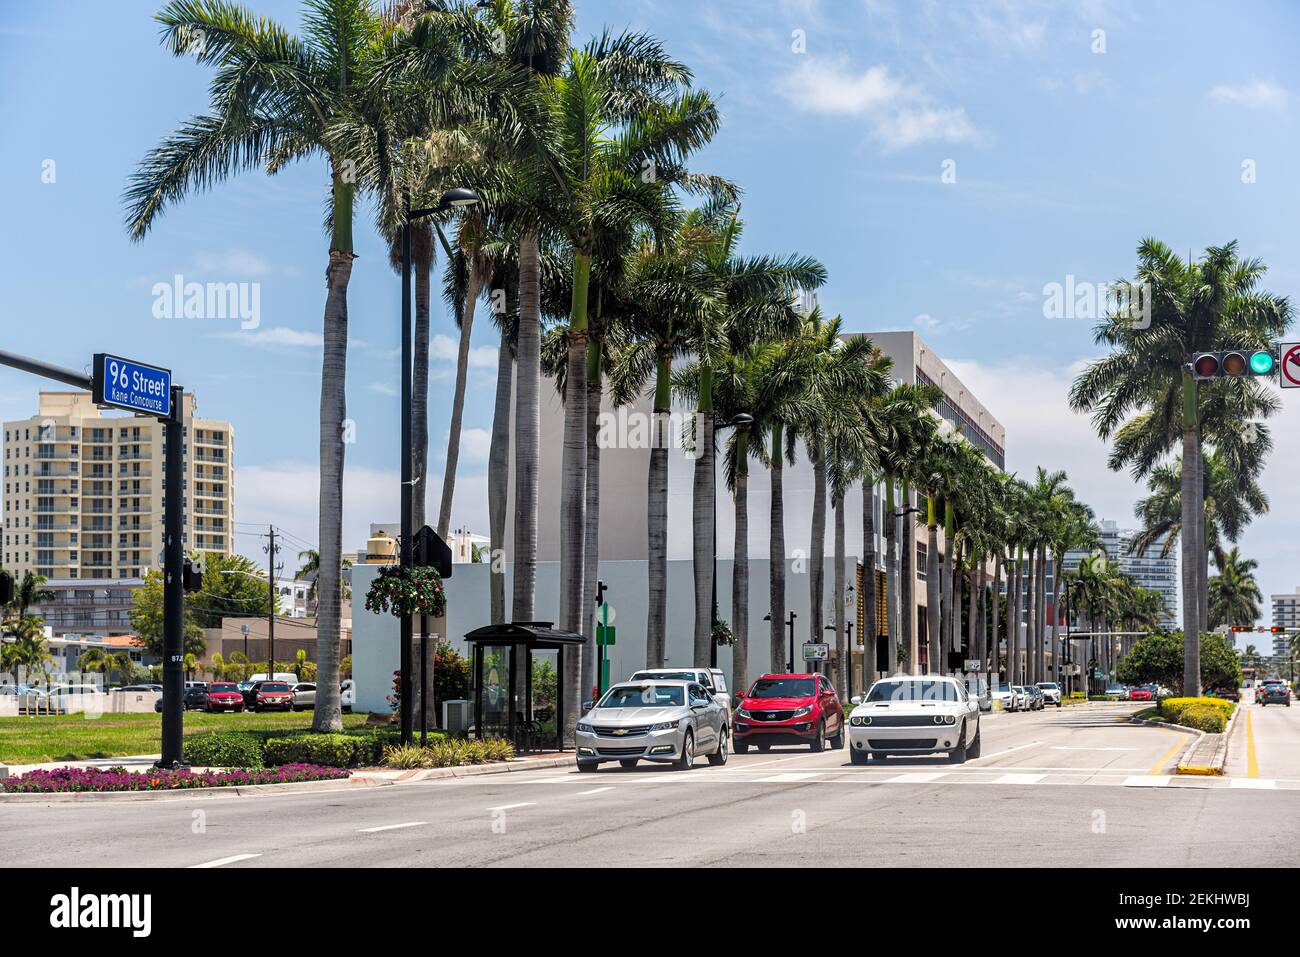 Bay Harbor Islands, USA - May 8, 2018: Intersection of 96 and West Bay Harbor drive street in Miami Dade county, Florida with cars driving on road wit Stock Photo